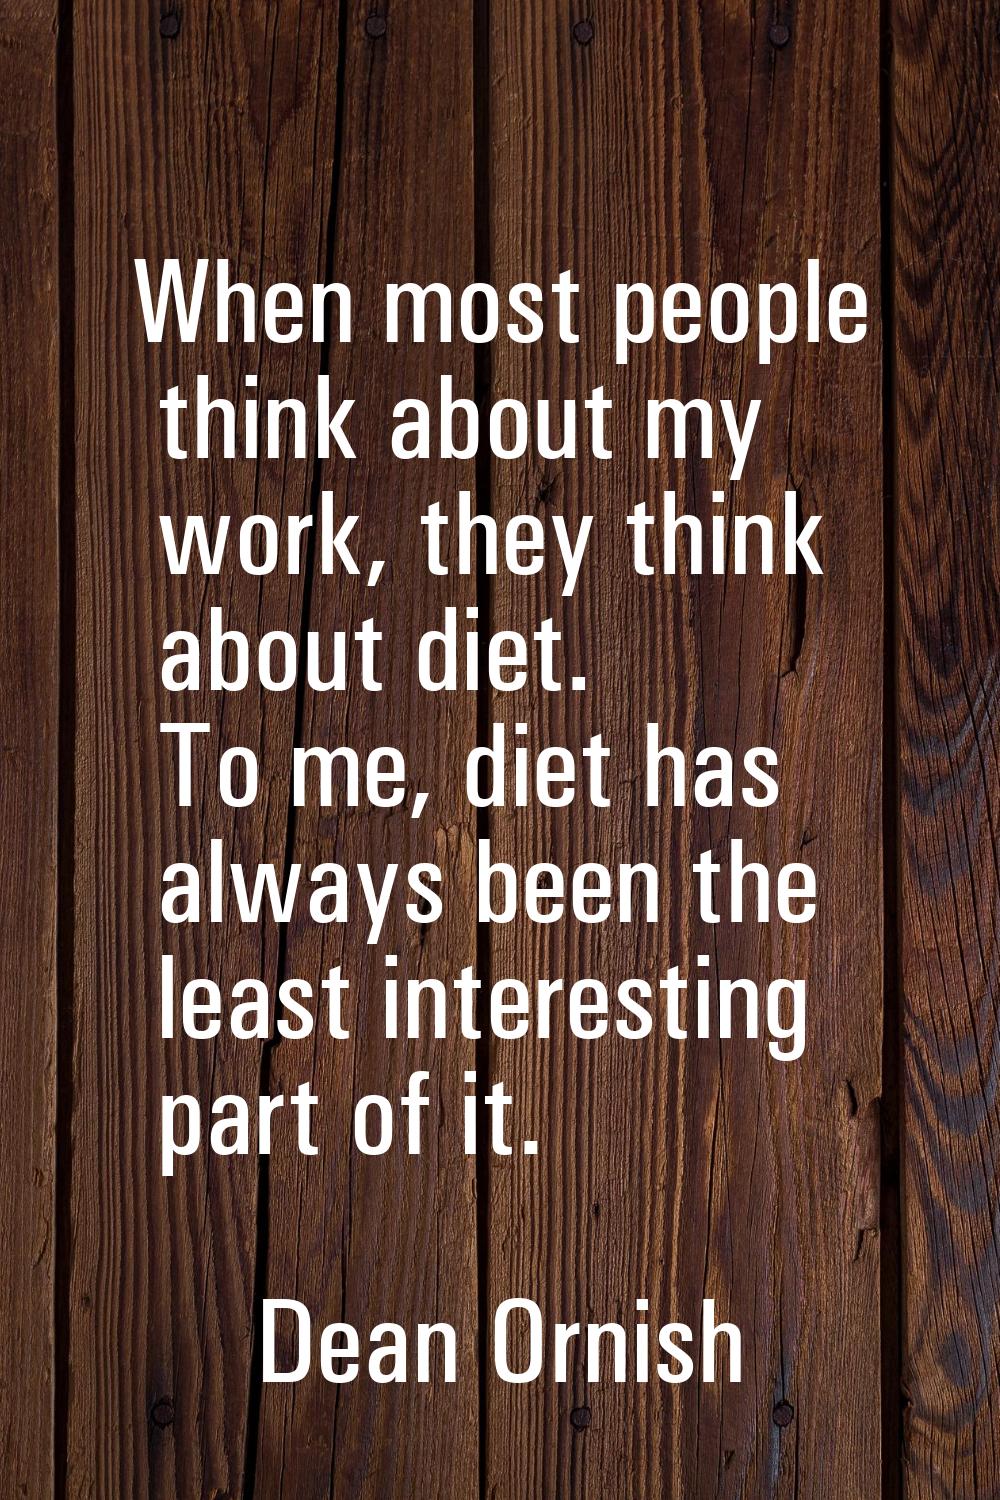 When most people think about my work, they think about diet. To me, diet has always been the least 